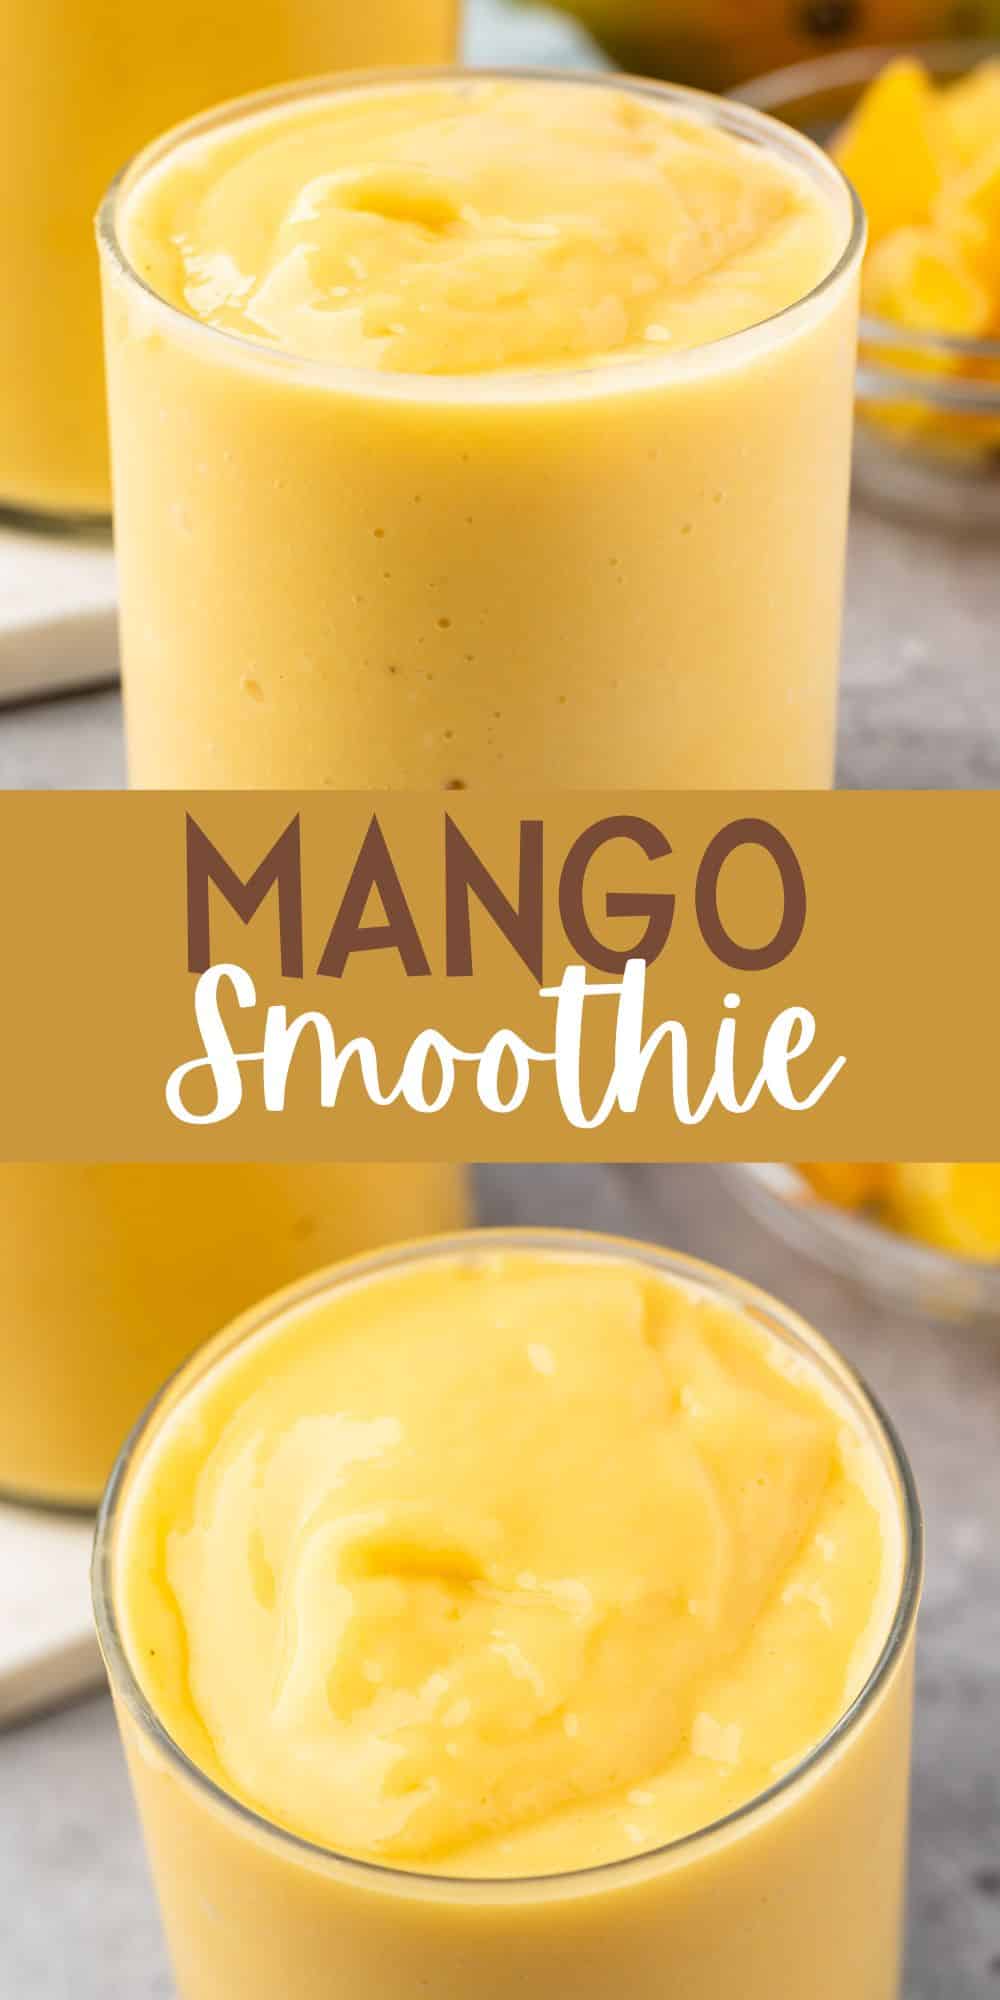 two photos of mango smoothie in a short clear glass with words on the image.